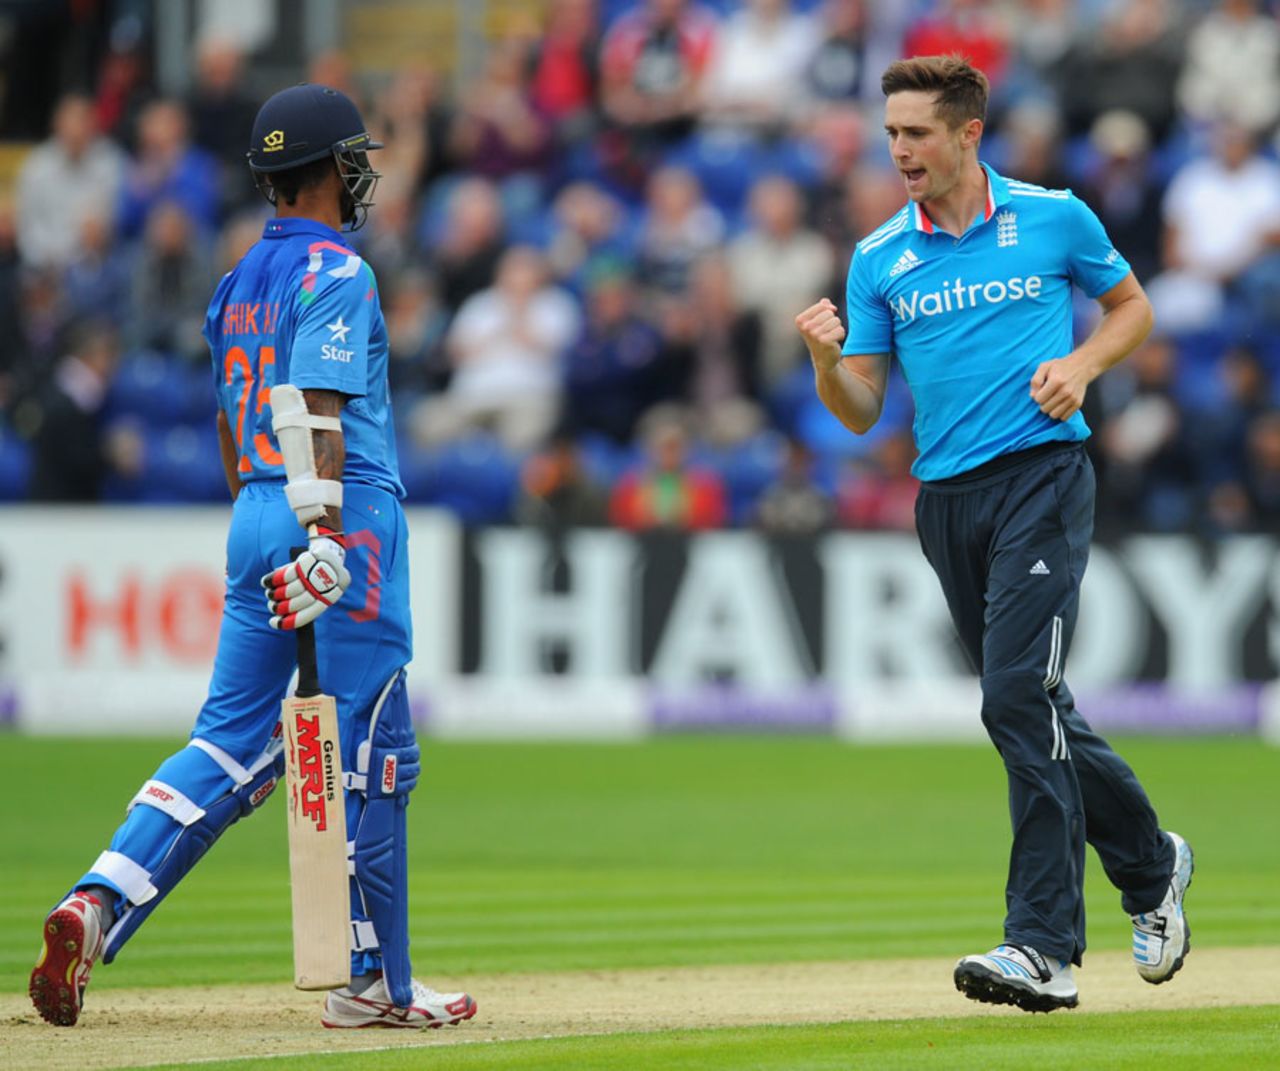 Chris Woakes is pleased after dismissing Shikhar Dhawan, 2nd ODI, England v India, Cardiff, August 27, 2014